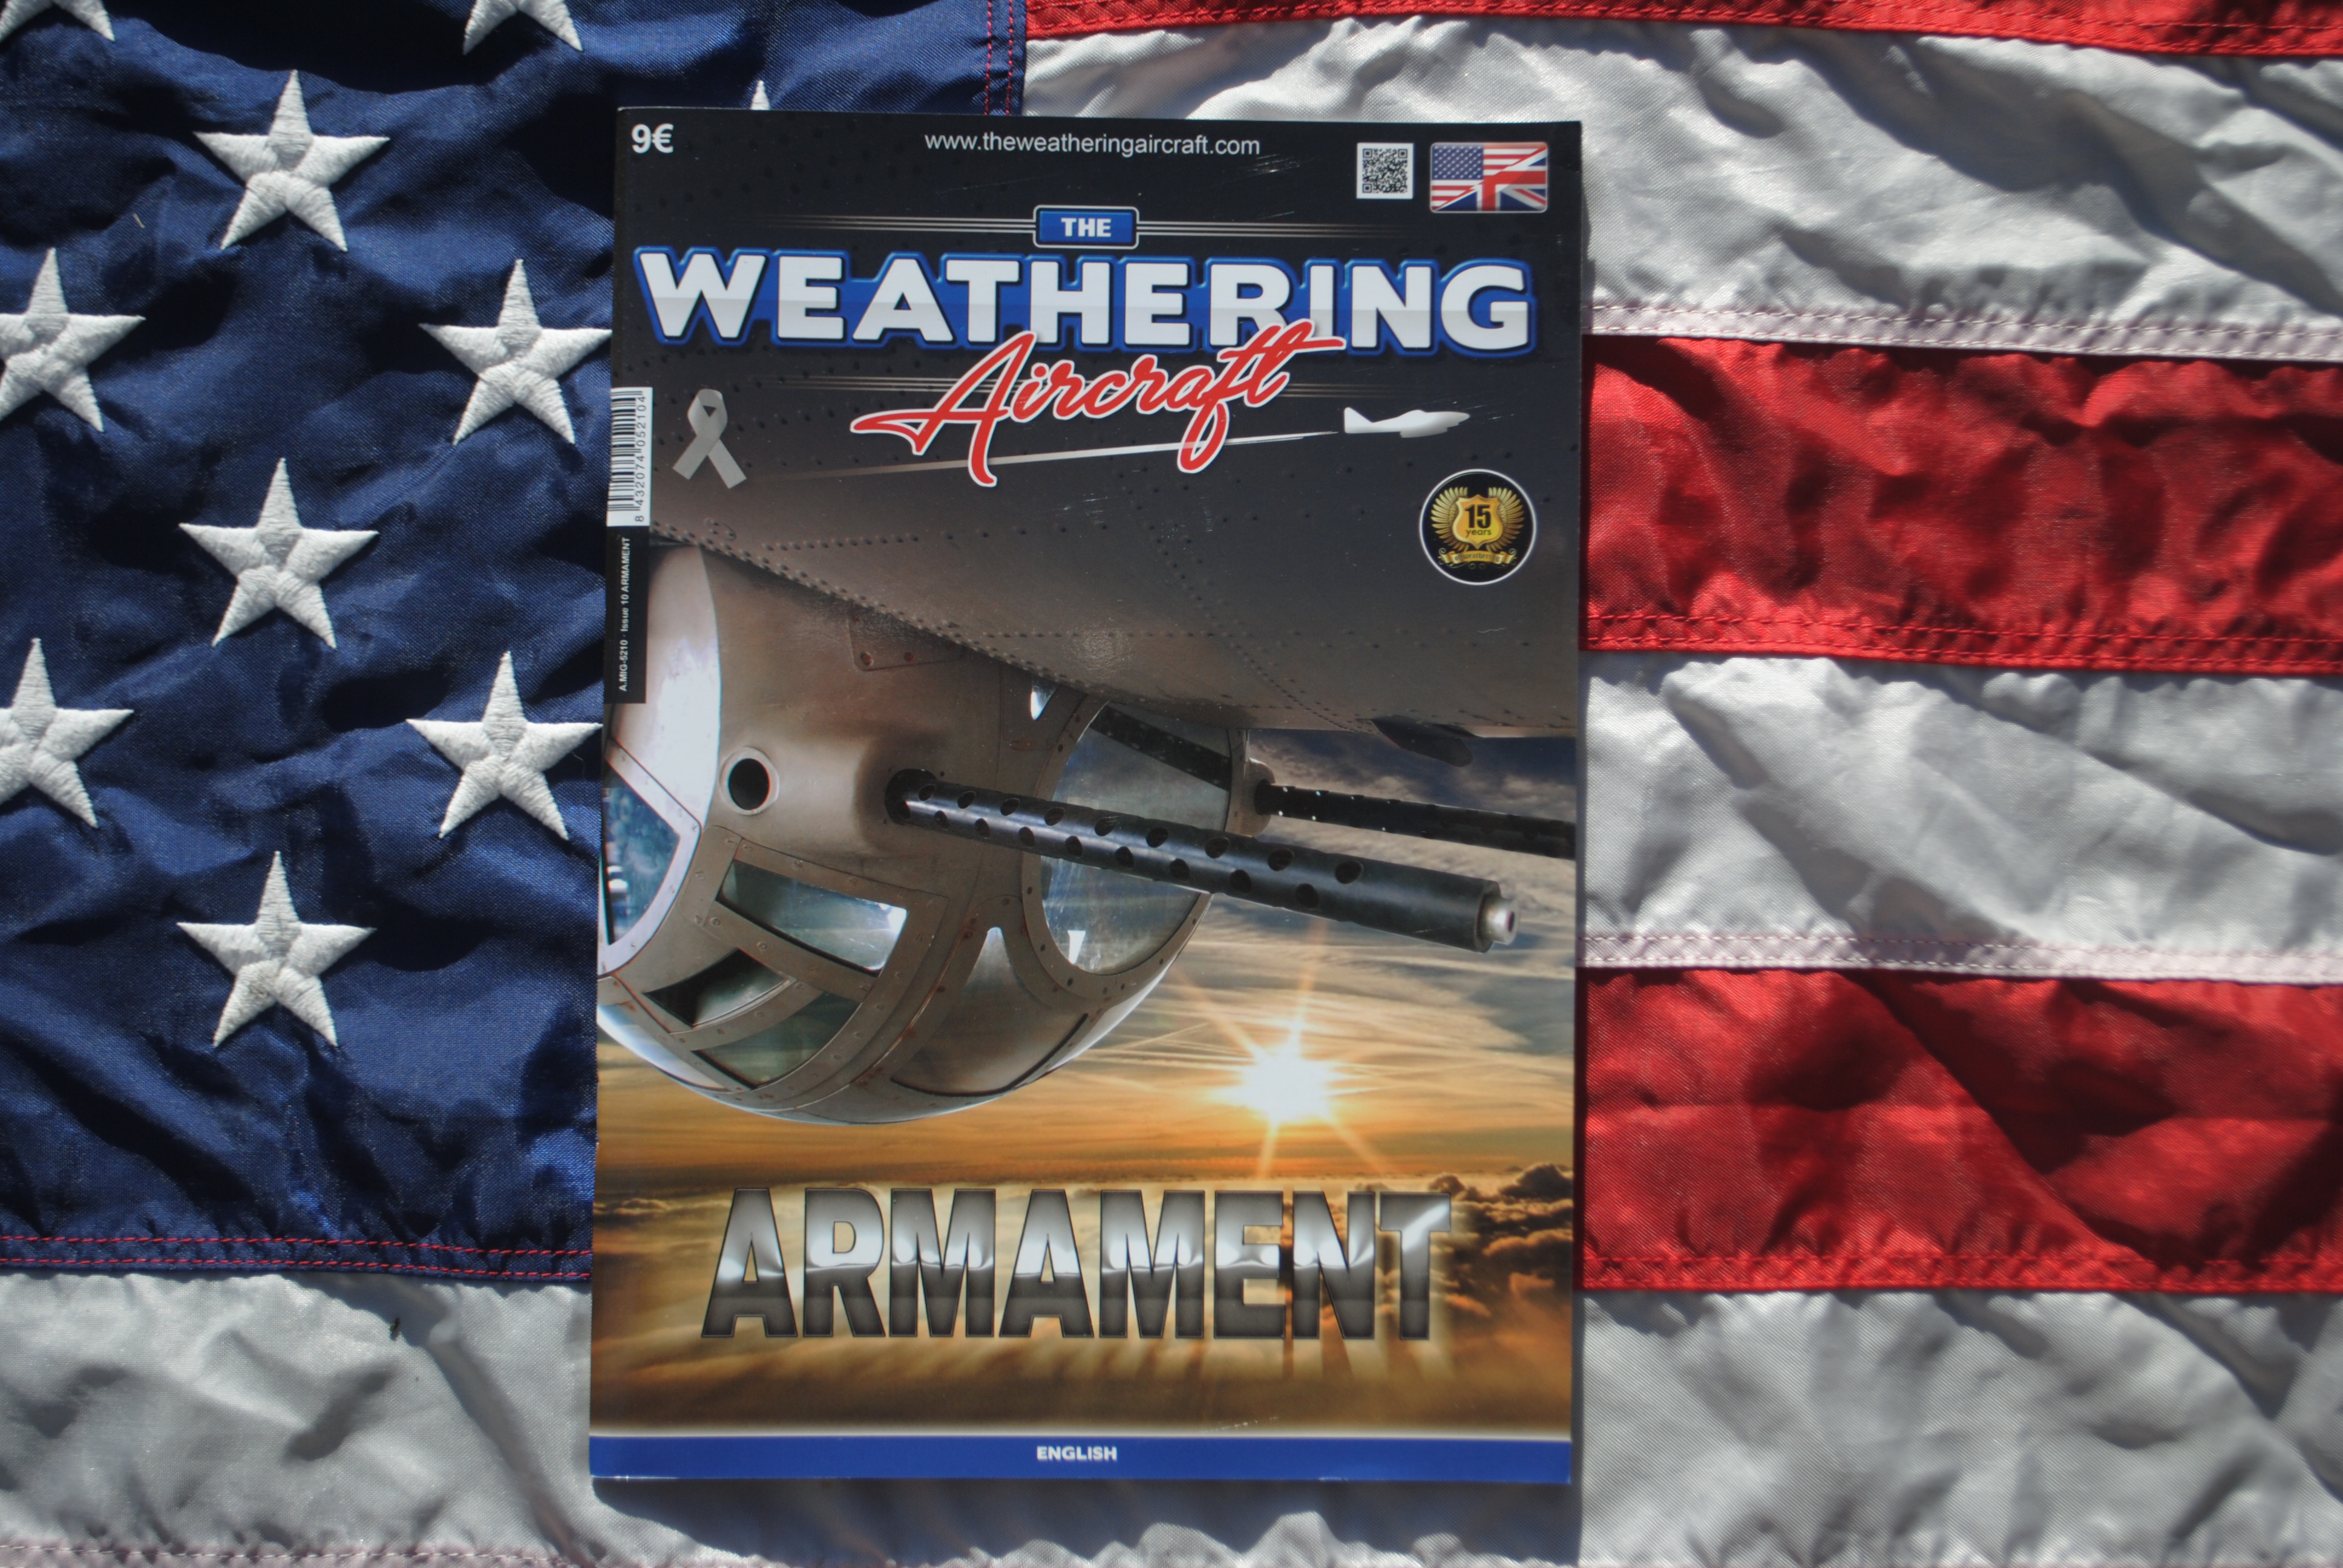 Ammo by Mig 5210 The WEATHERING Aircraft Magazine 'ARMAMENT'